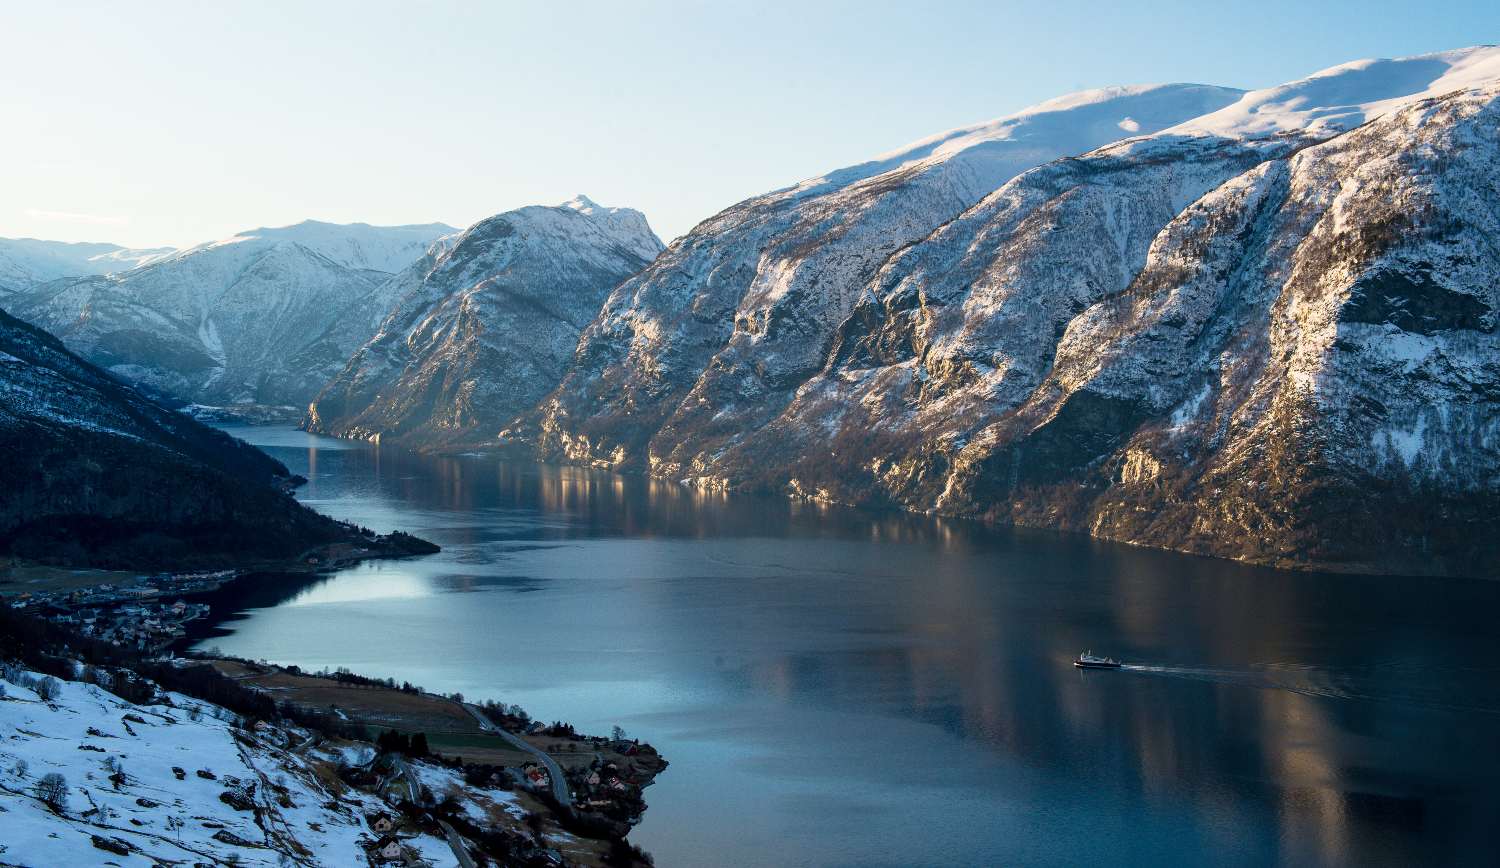 Things to do in Bergen - visit the fjords